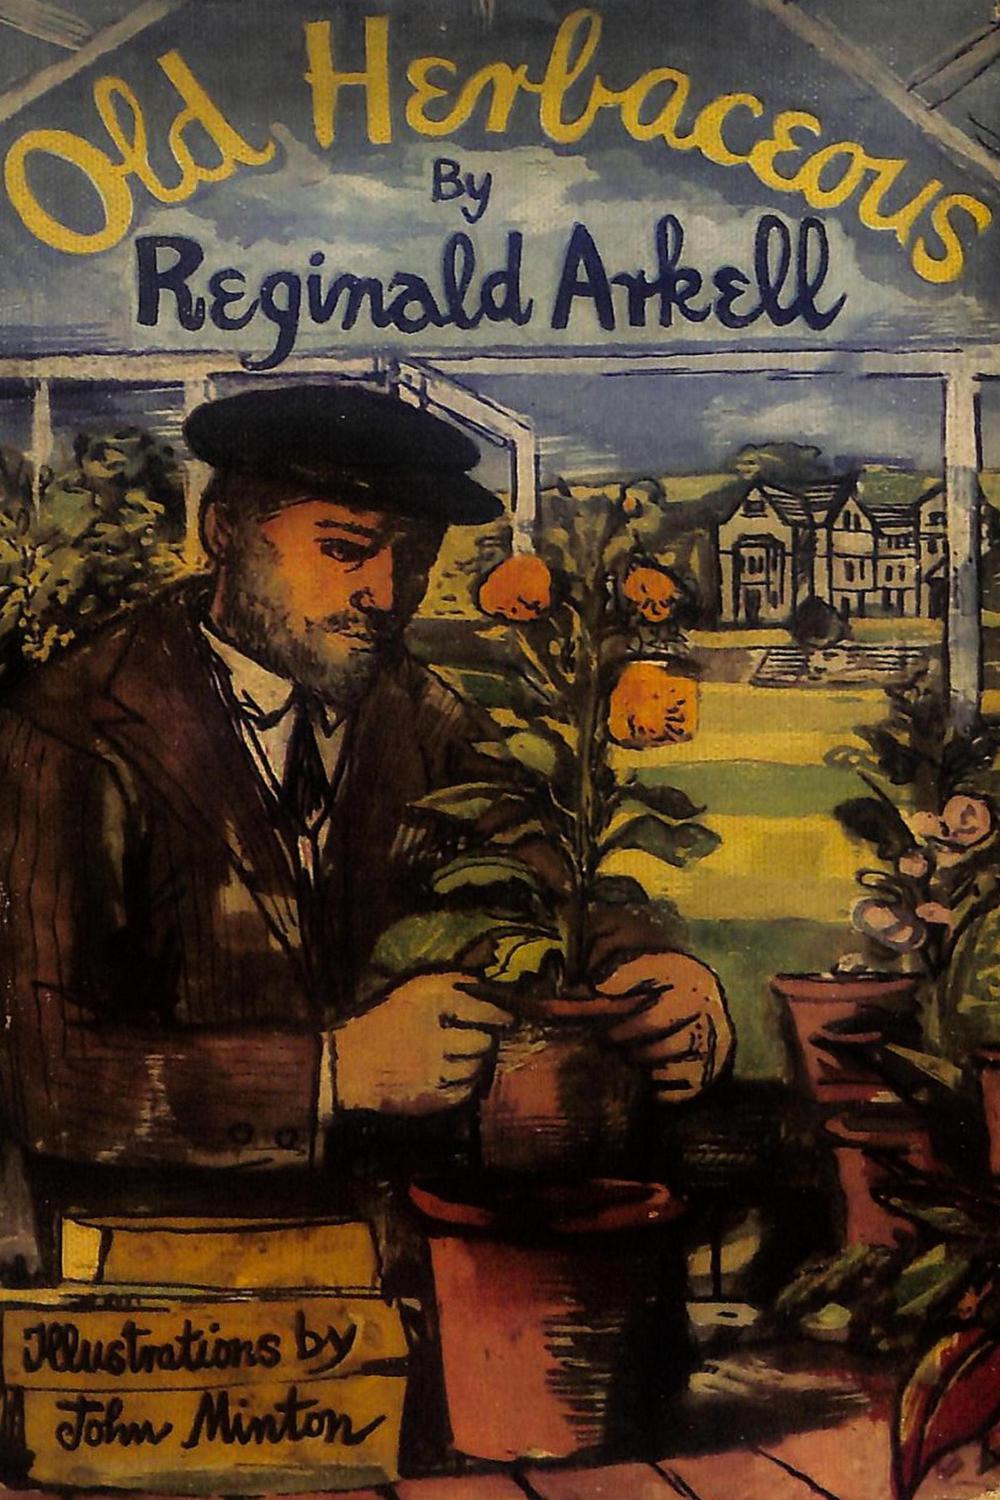 Old Herbaceous - Reginald Arkell